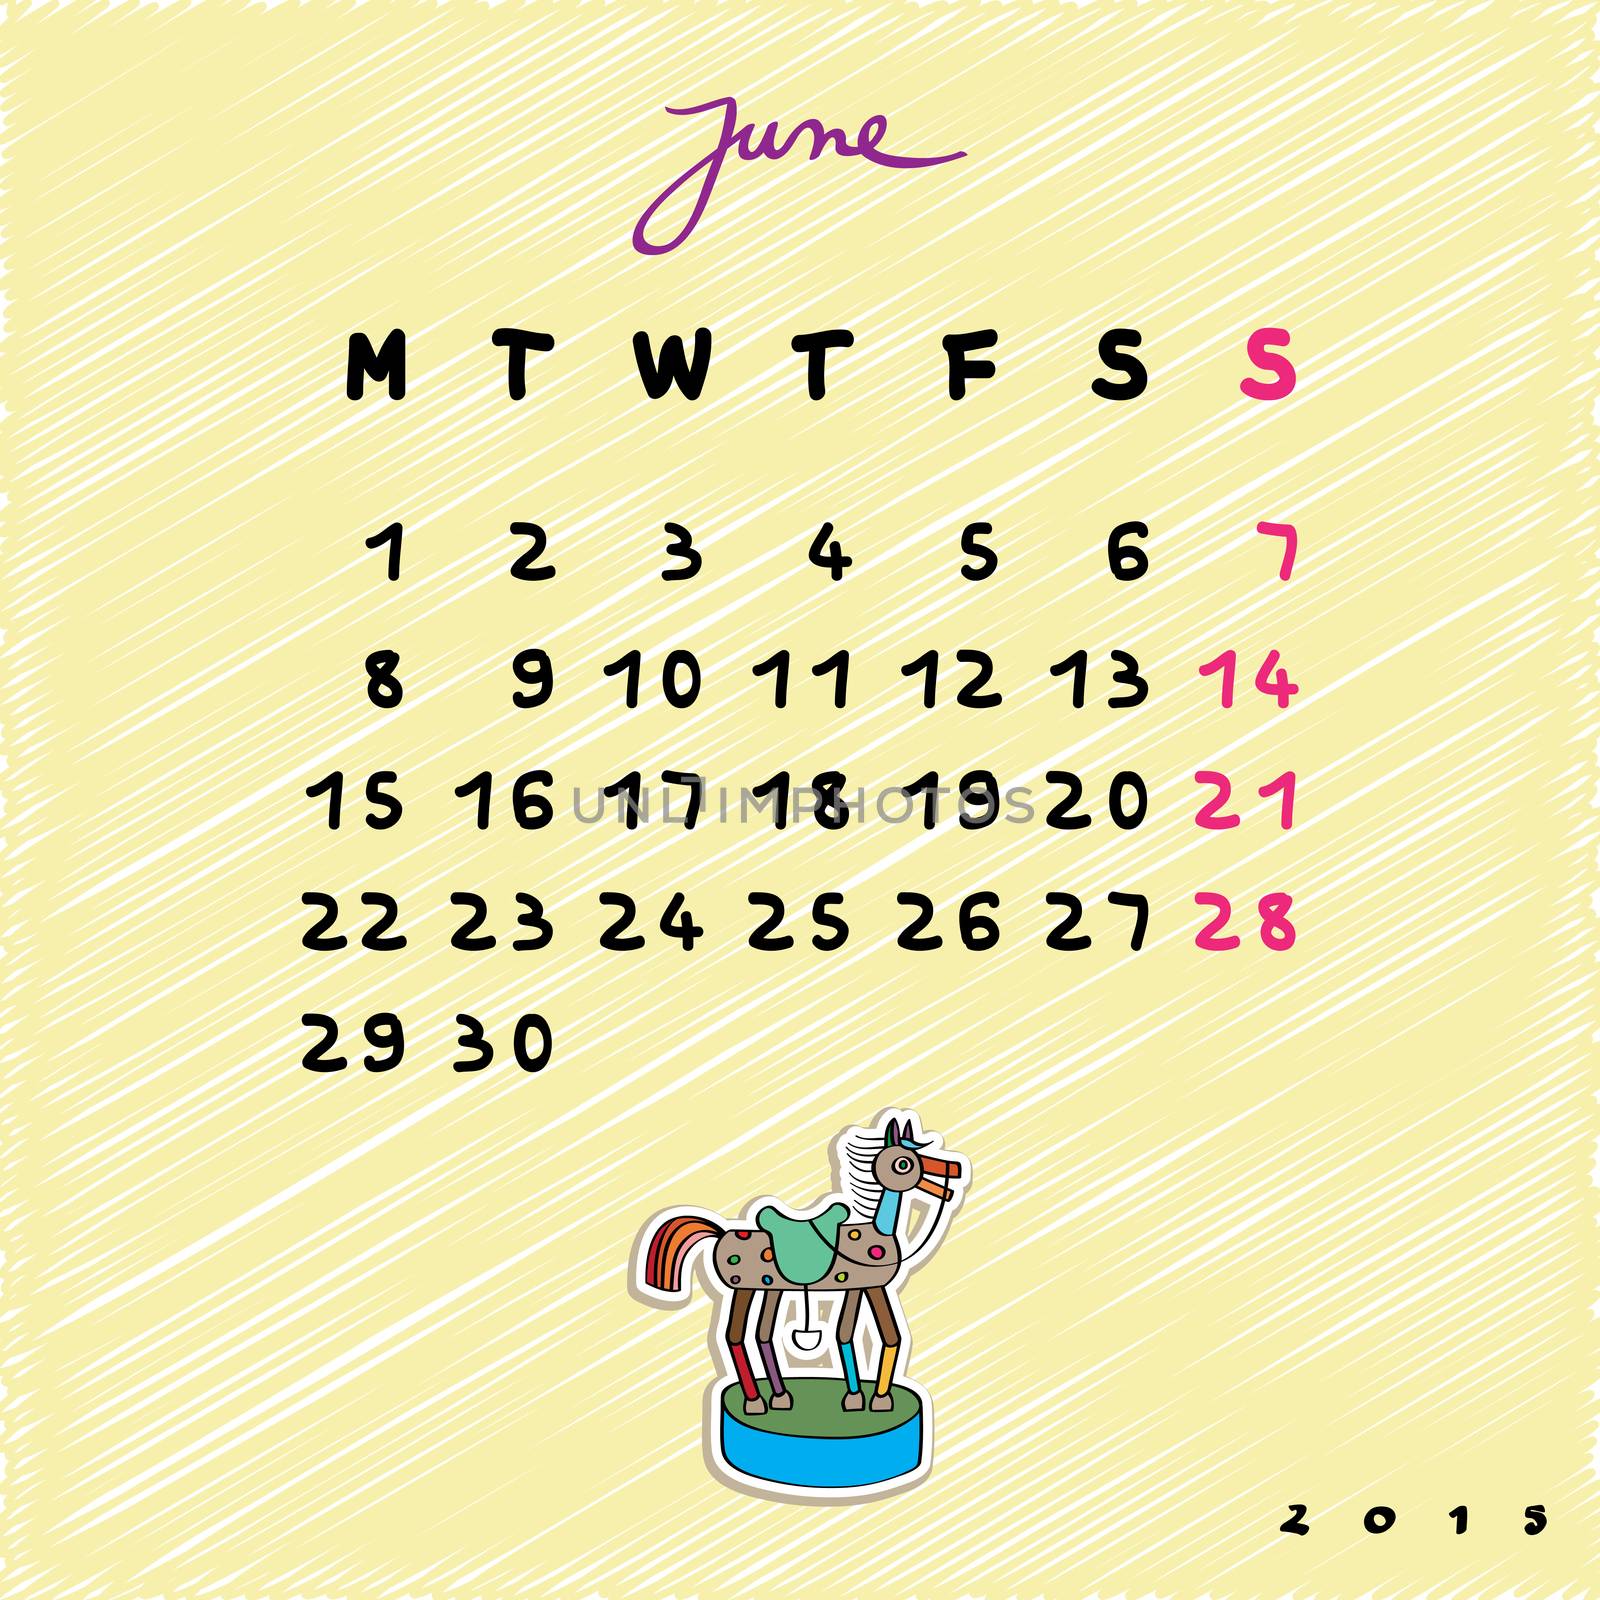 2015 horses june by catacos